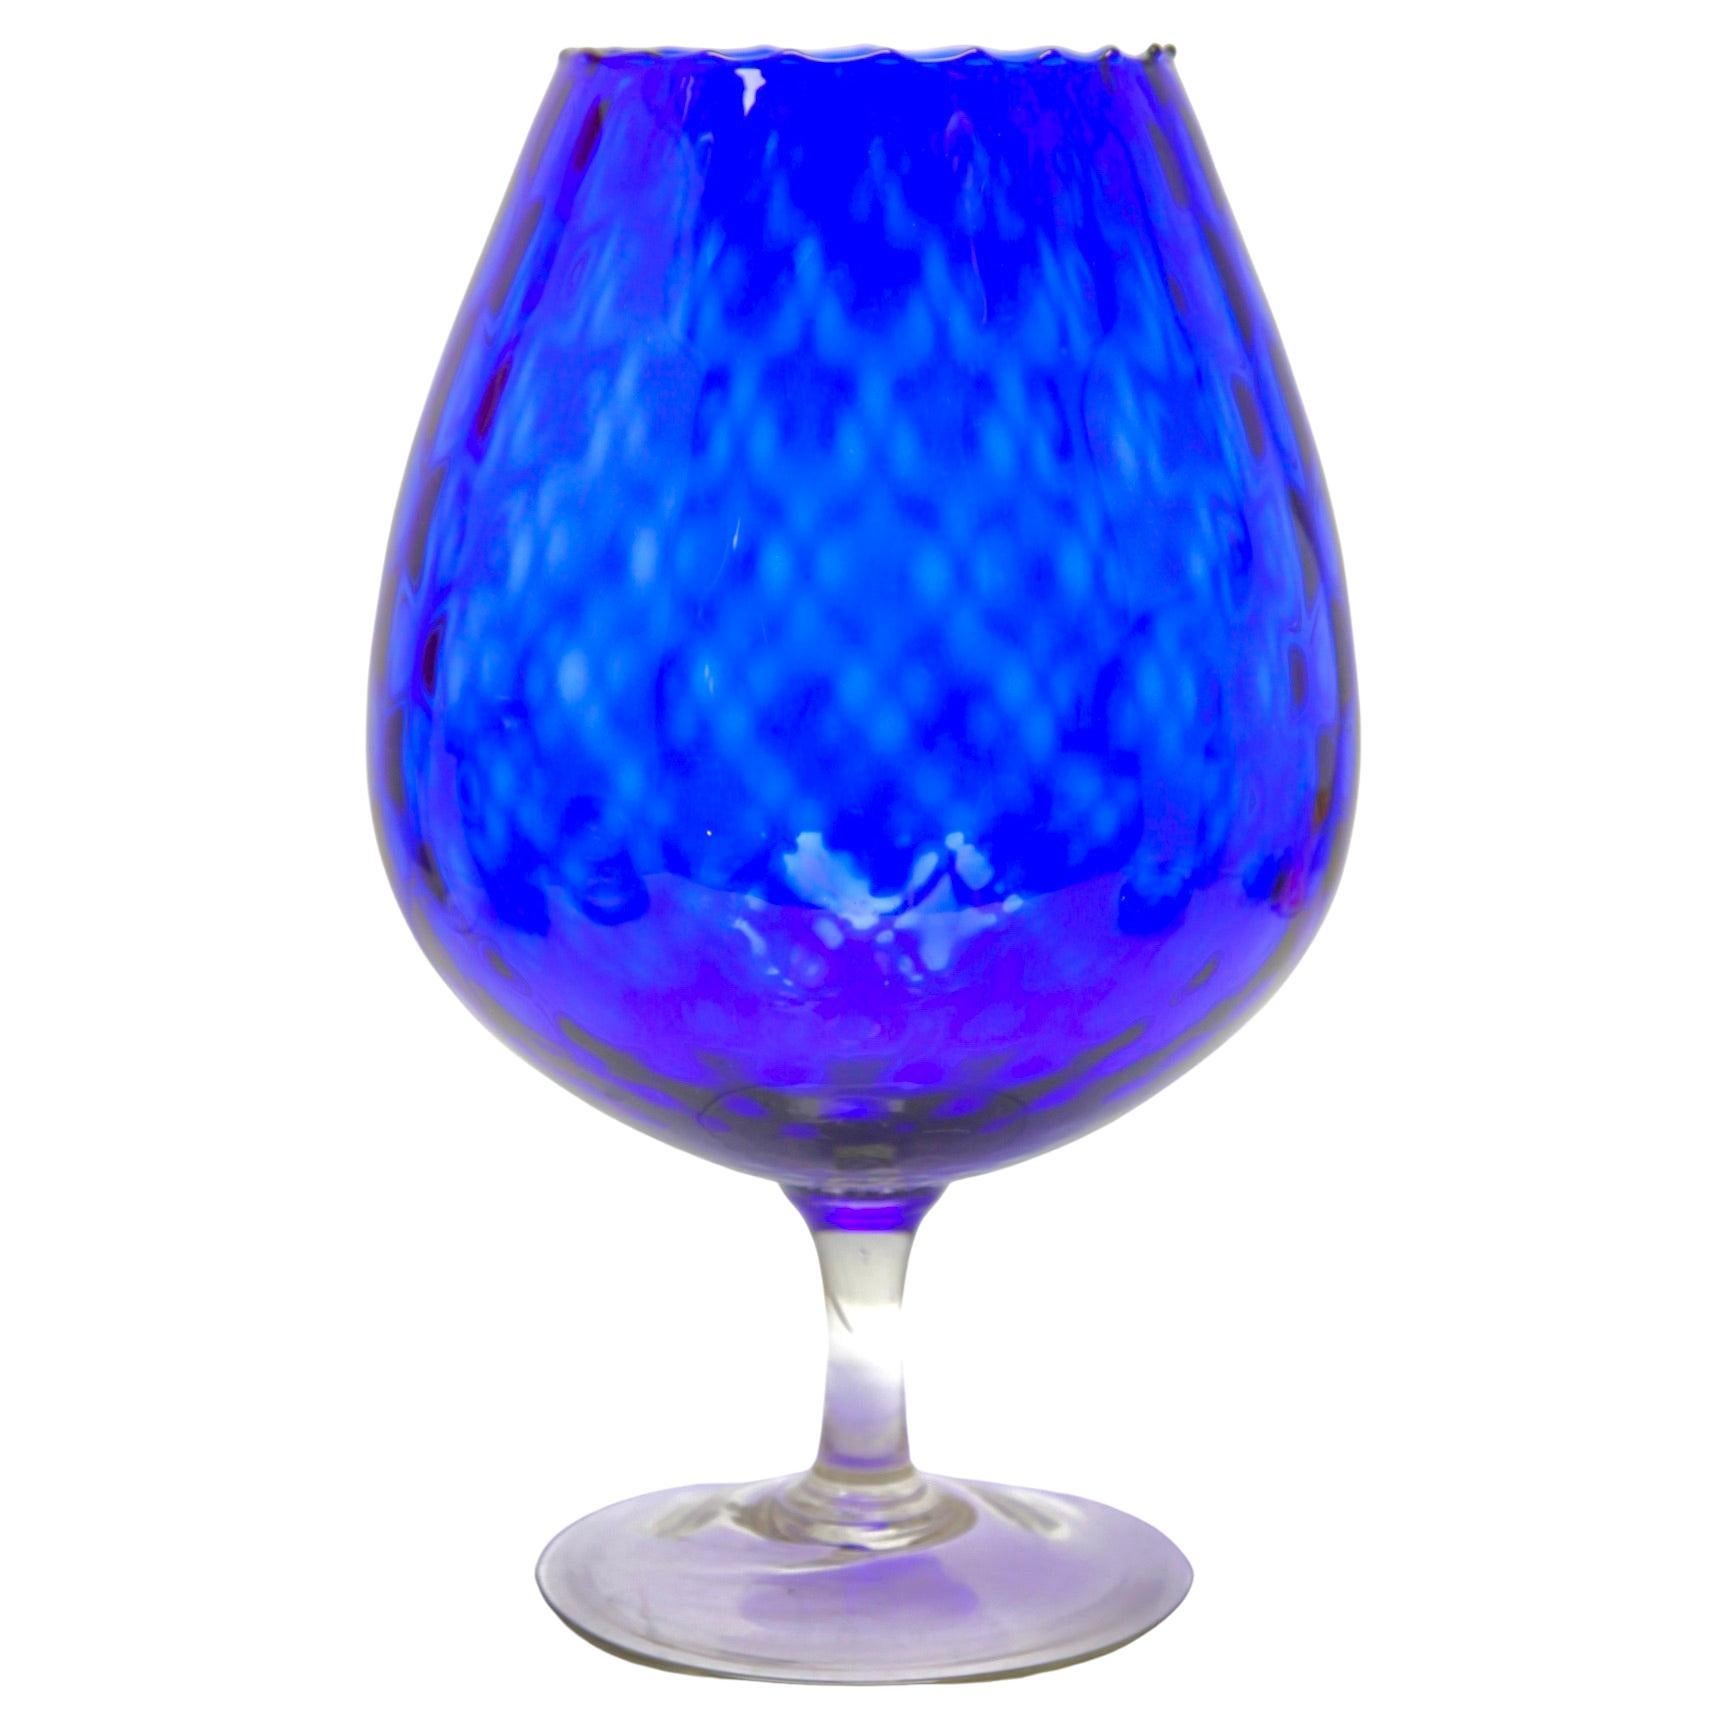 Empoli 'Florence, Italy' Large Optical Glass on Foot Cobalt Blue For Sale